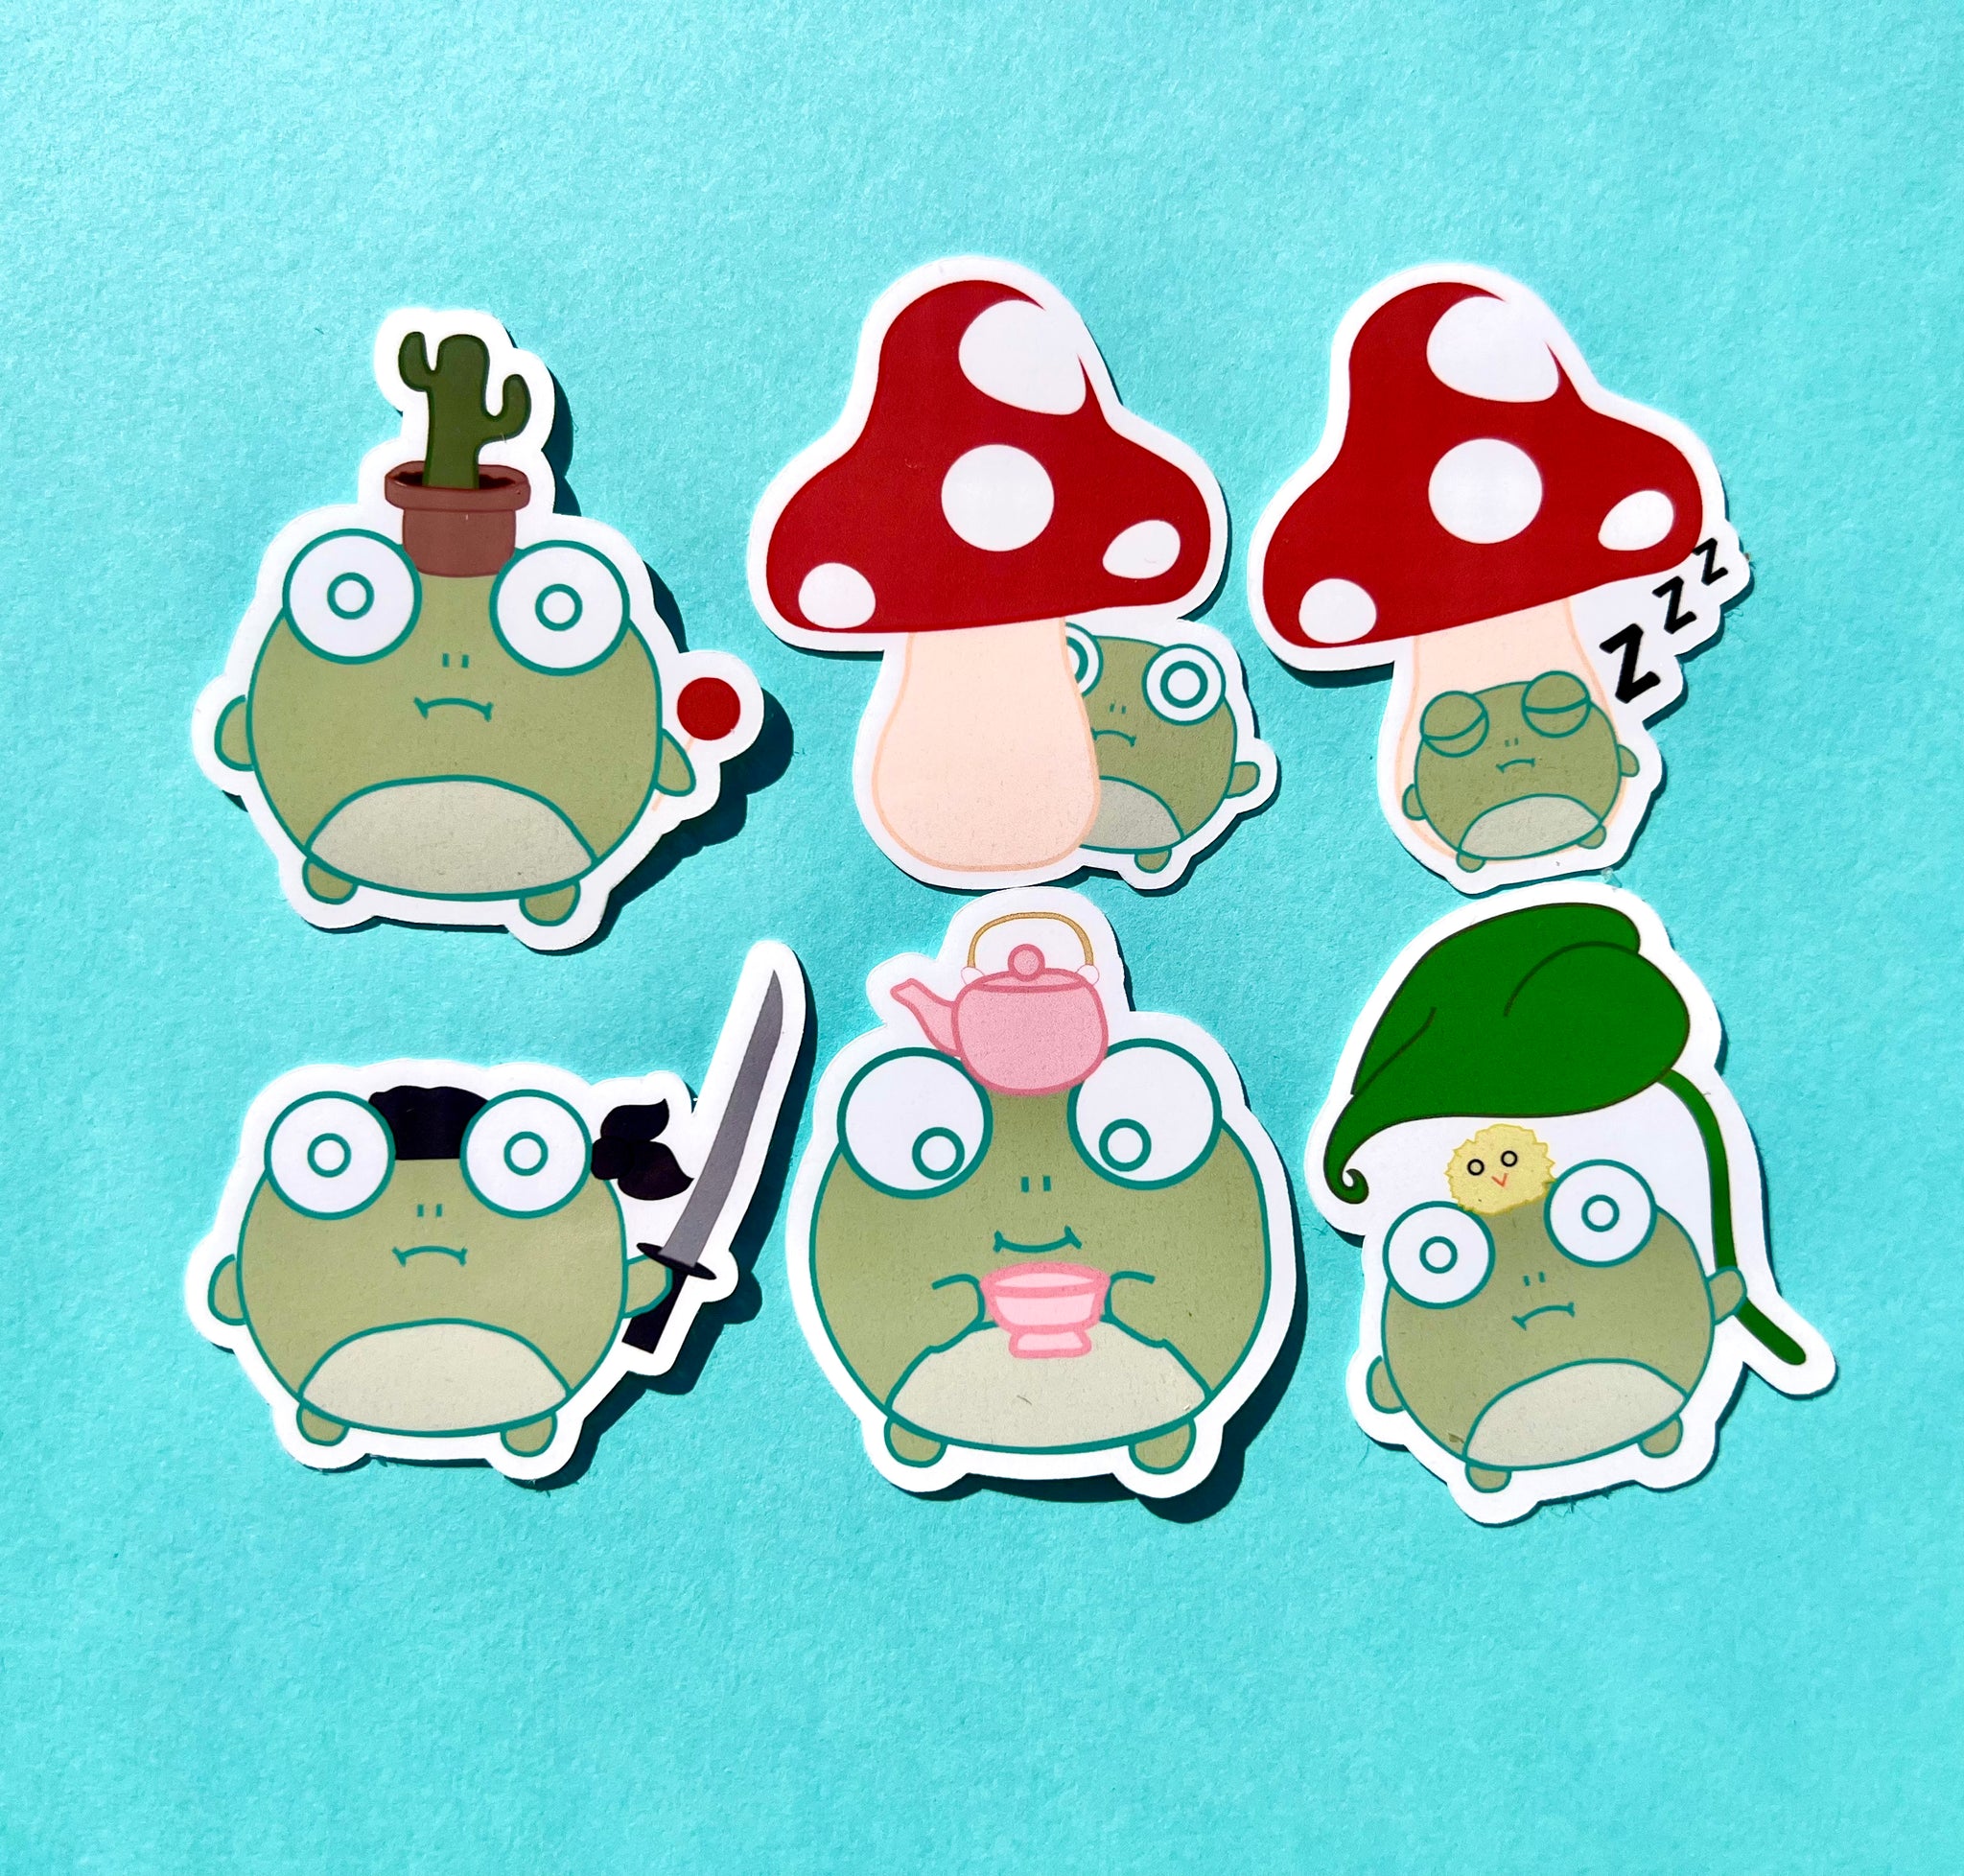 Frogs doing frog things sticker pack